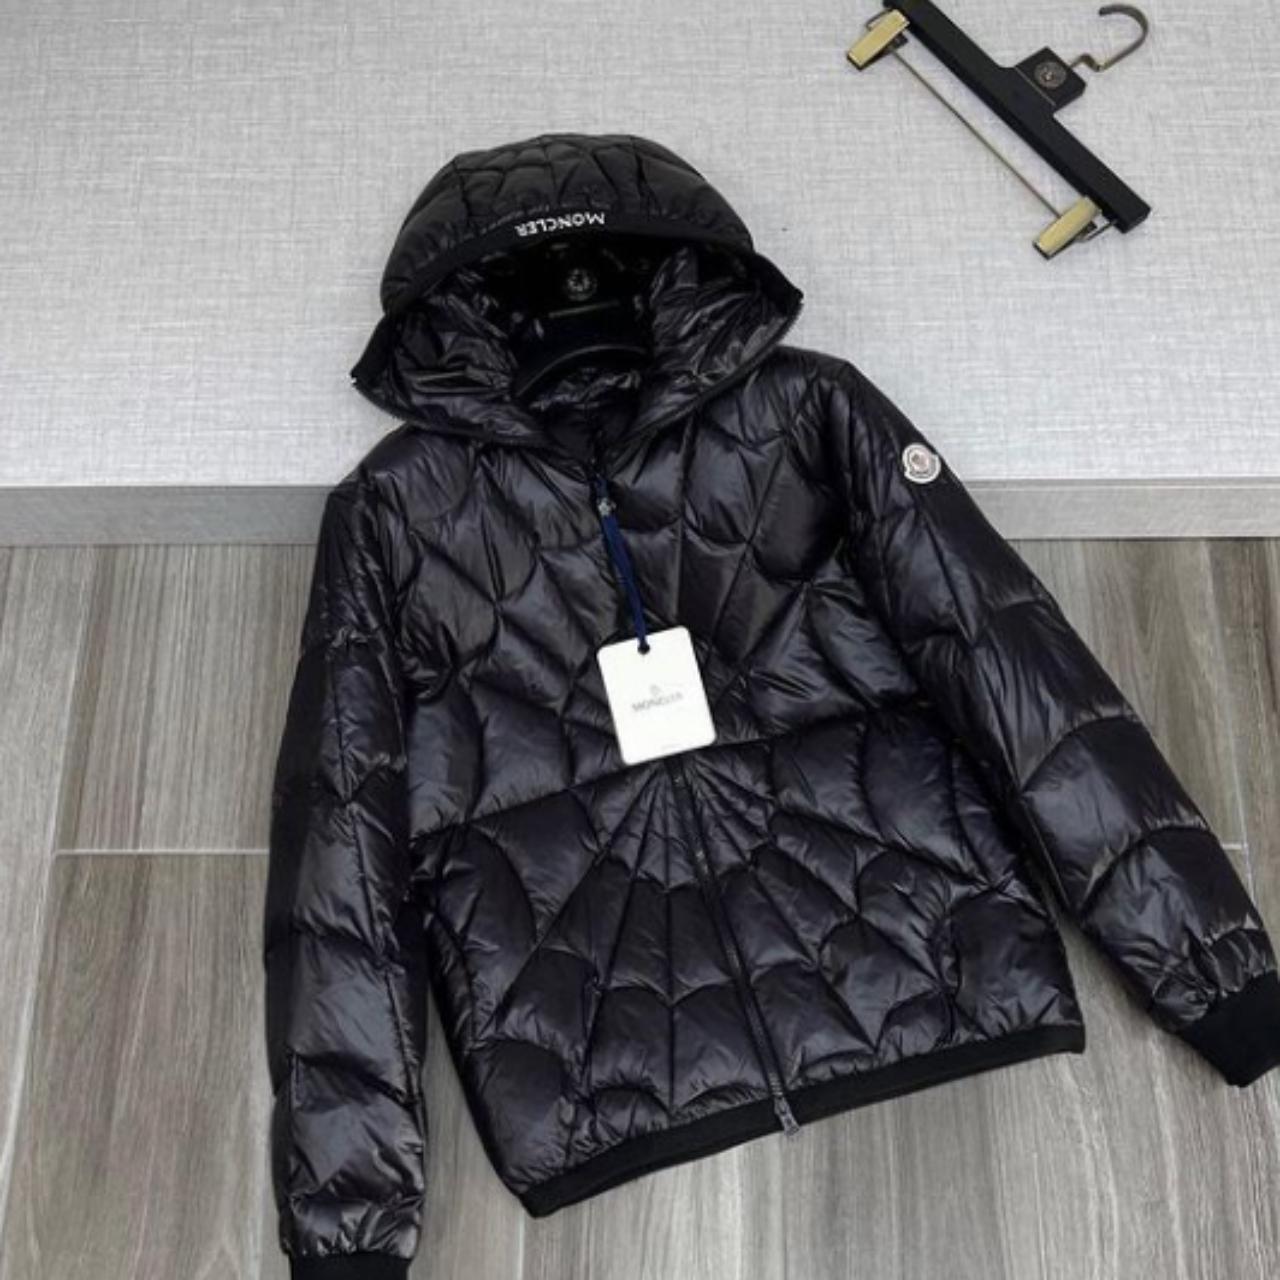 Moncler Spider jacket - wore a couple times and its... - Depop